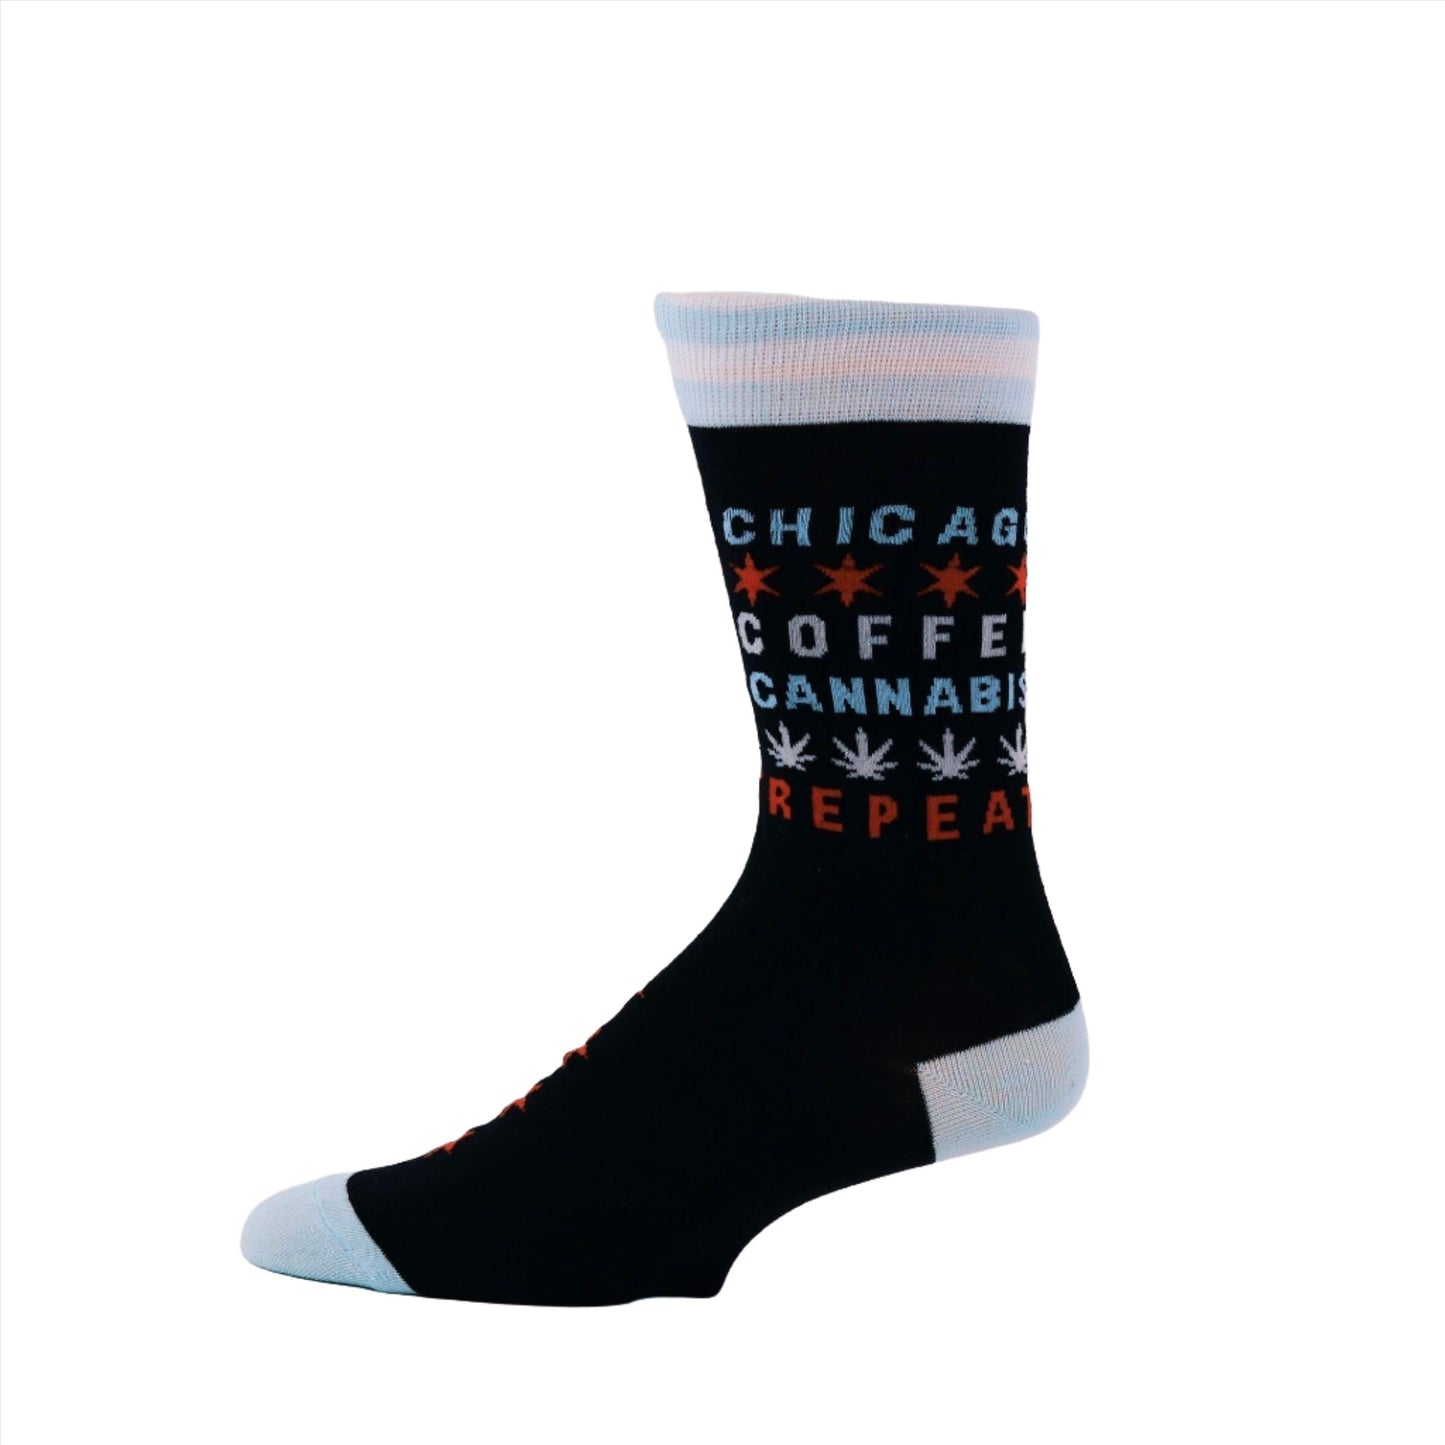 Chicago Coffee Cannabis Repeat Socks - Love From USA